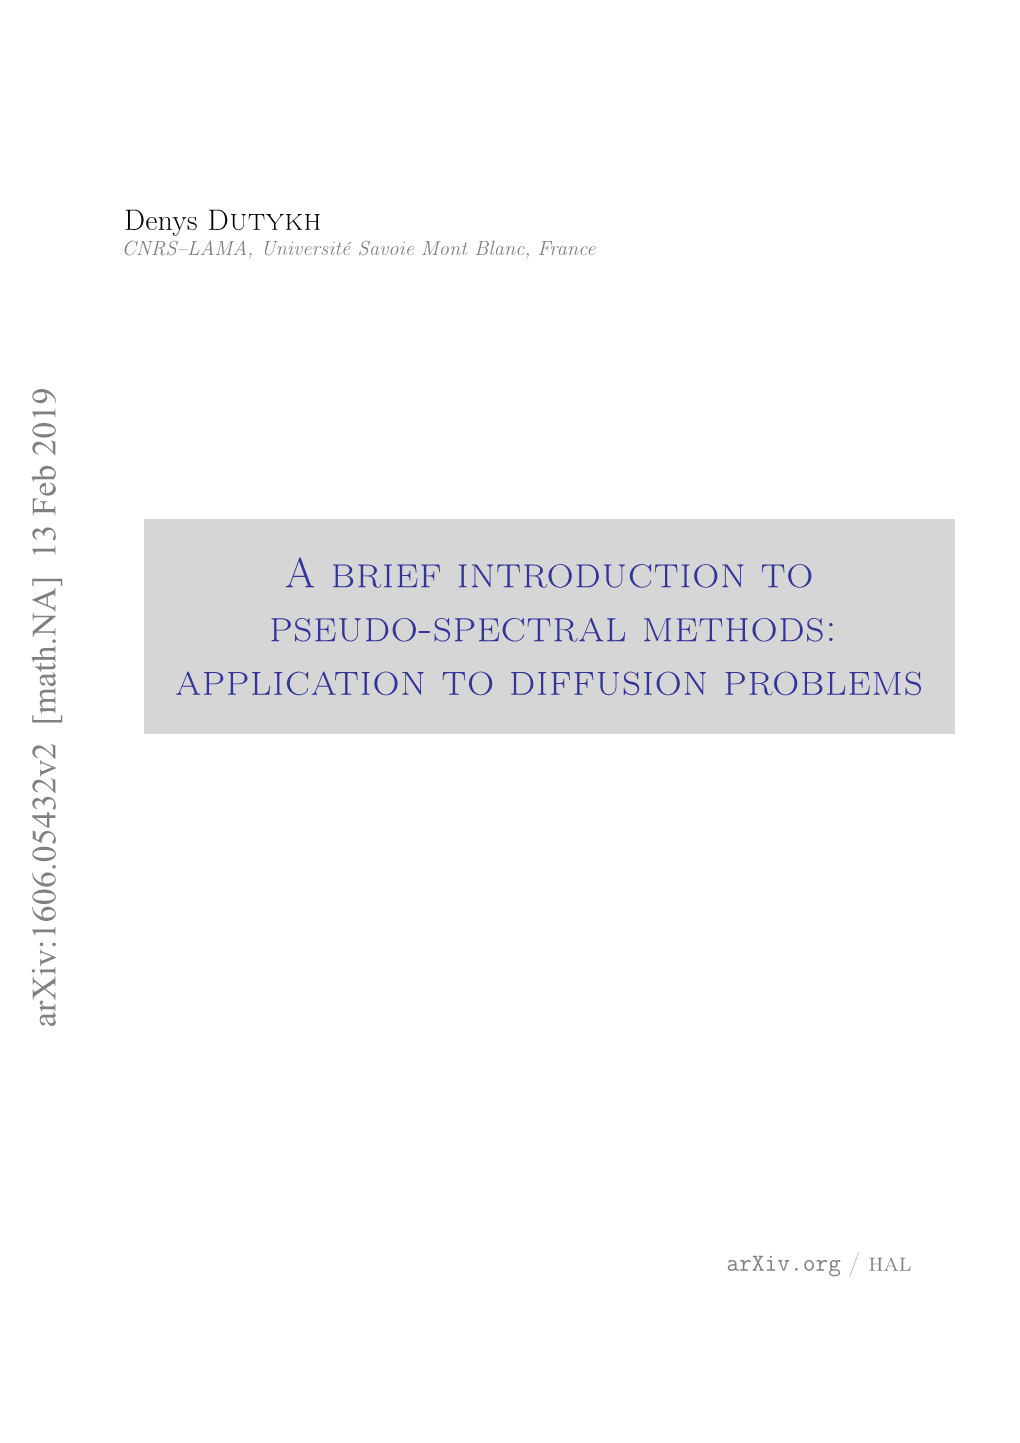 A Brief Introduction to Pseudo-Spectral Methods: Application to Diffusion Problems